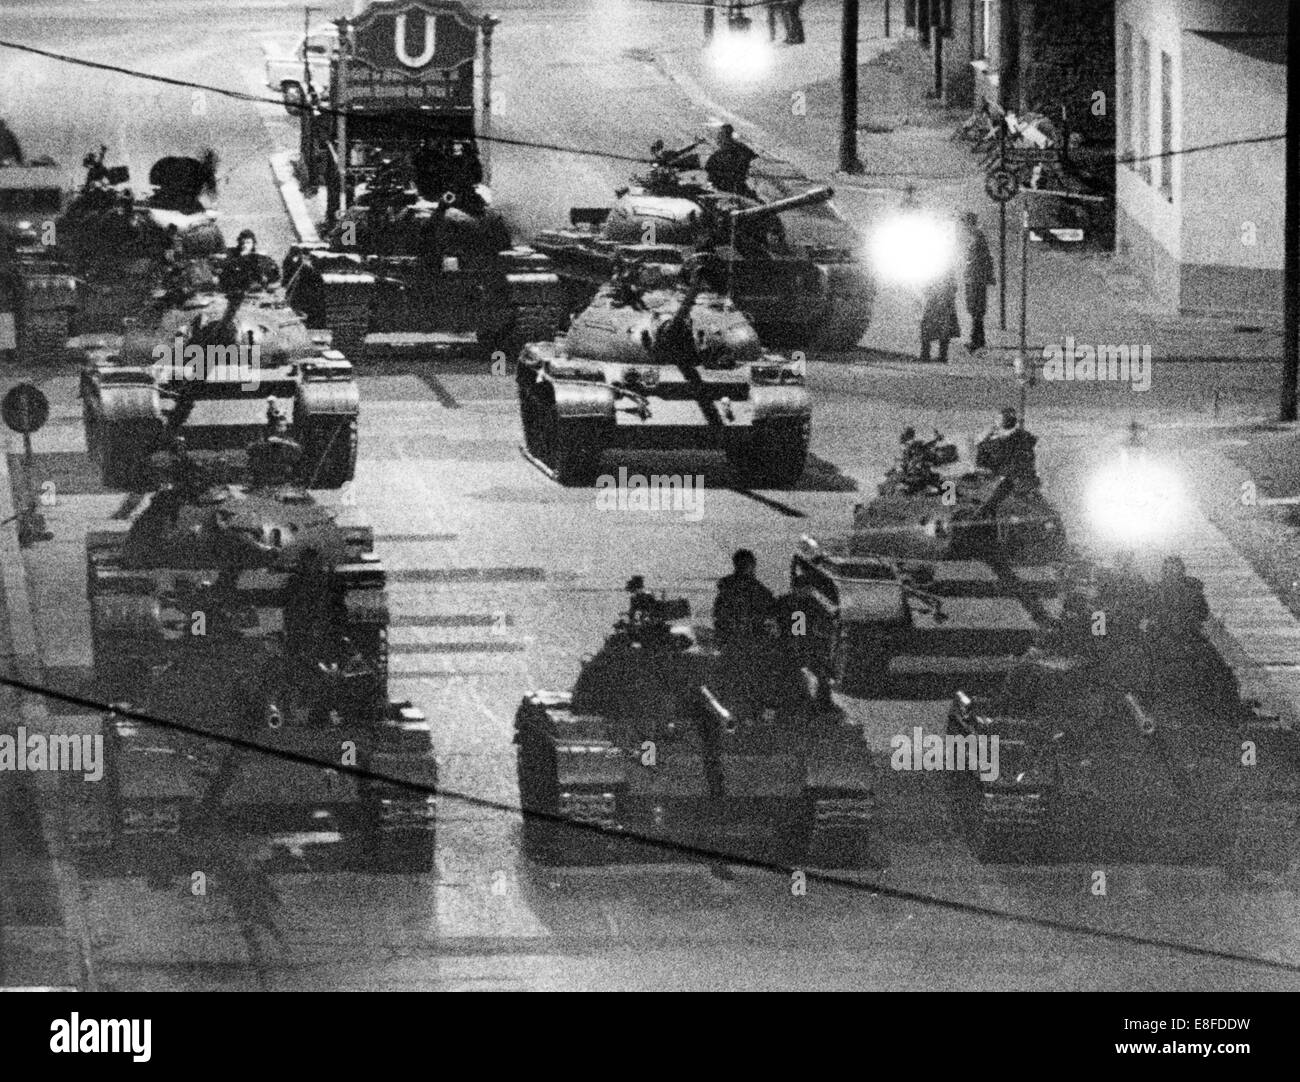 Soviet tanks in the early hours of the morning in East Berlin on 28 October 1961. After an incident at the border crossing-point Friedrichstraße 'Checkpoint Charlie', tanks of the U.S. and the Soviet army drove up on both sides of the border, but withdraw after one day. From 13 August 1961, the day of the building of the Berlin Wall, to the fall of the Berlin Wall on 9 November 1989, the Federal Republic of Germany and the GDR were separated by the Iron Curtain between West and East. Stock Photo